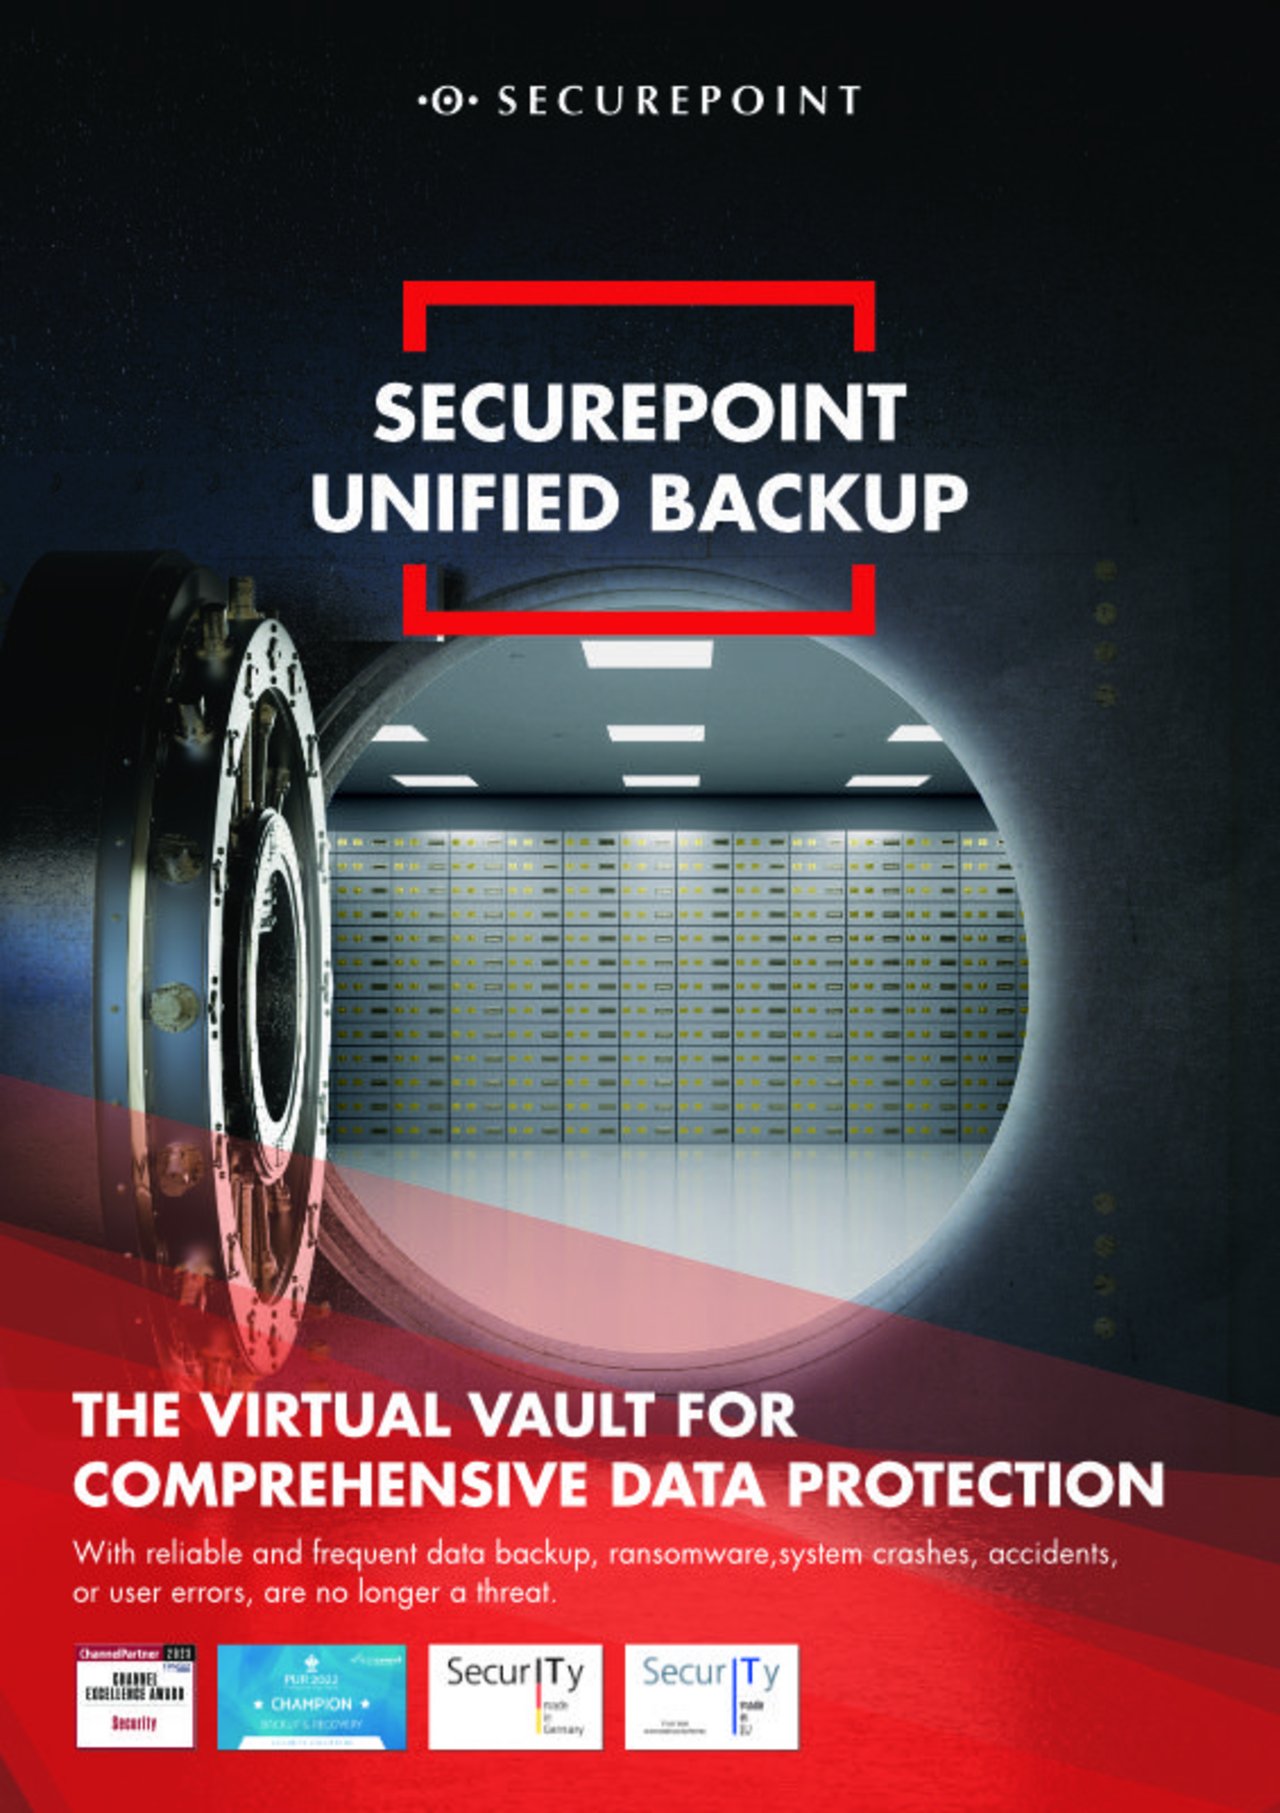 Title for the Securepoint Unified Backup prospect